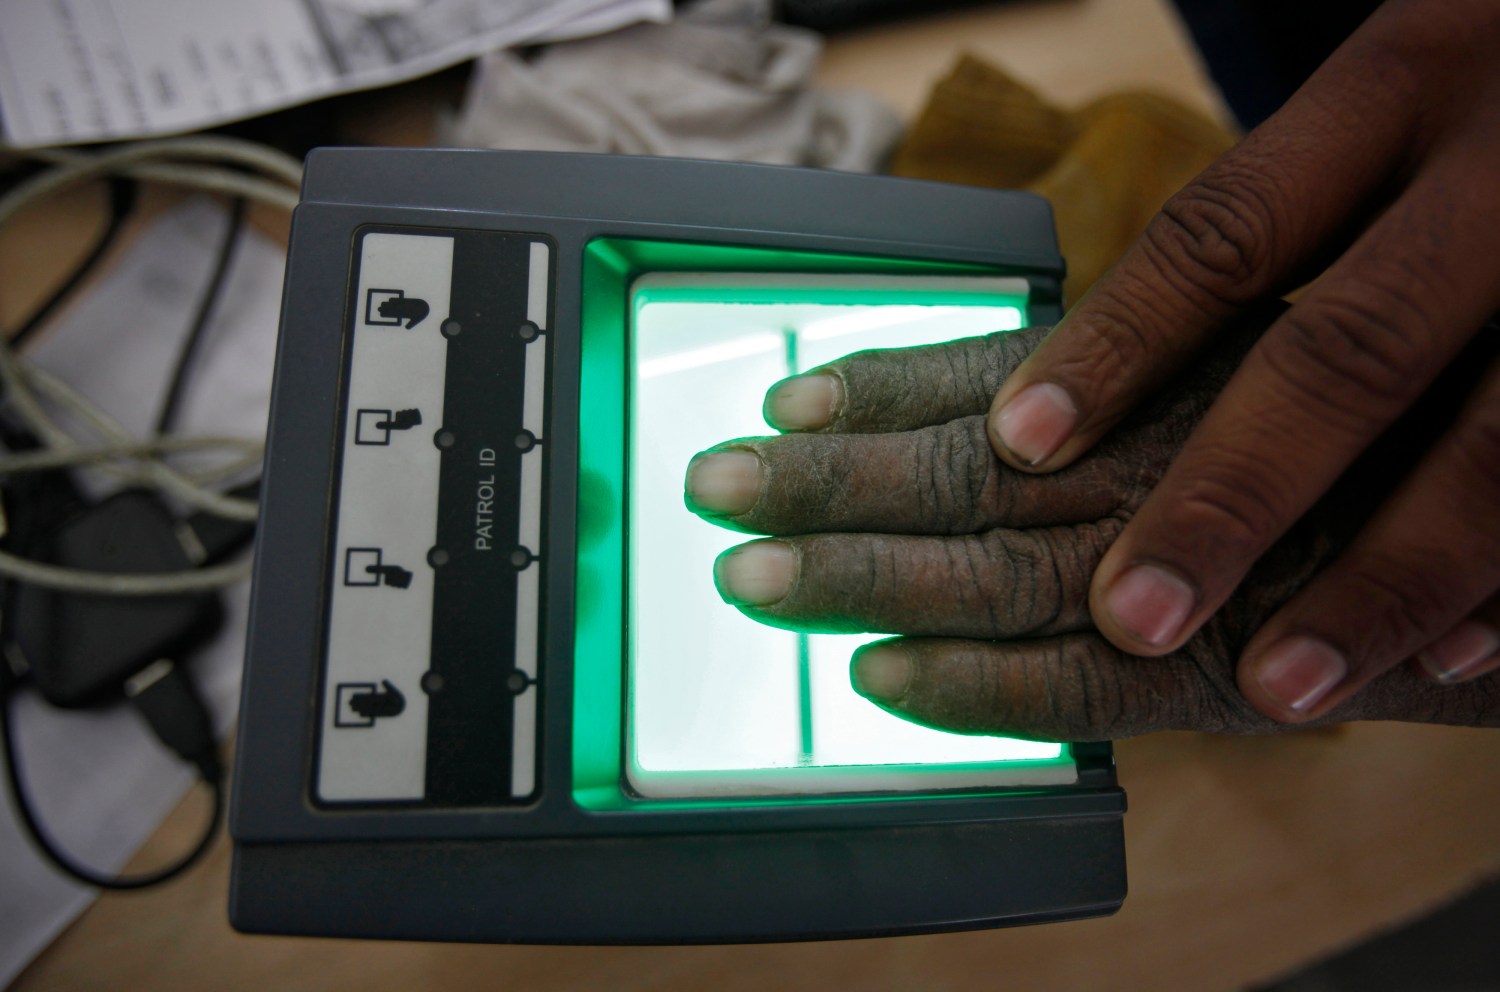 A villager goes through the process of a fingerprint scanner for the Unique Identification (UID) database system at an enrolment centre at Merta district in the desert Indian state of Rajasthan February 22, 2013. In a more ambitious version of programmes that have slashed poverty in Brazil and Mexico, the Indian government has begun to use the UID database, known as Aadhaar, to make direct cash transfers to the poor, in an attempt to cut out frauds who siphon billions of dollars from welfare schemes. Picture taken February 22, 2013. REUTERS/Mansi Thapliyal (INDIA - Tags: BUSINESS SOCIETY POVERTY SCIENCE TECHNOLOGY)